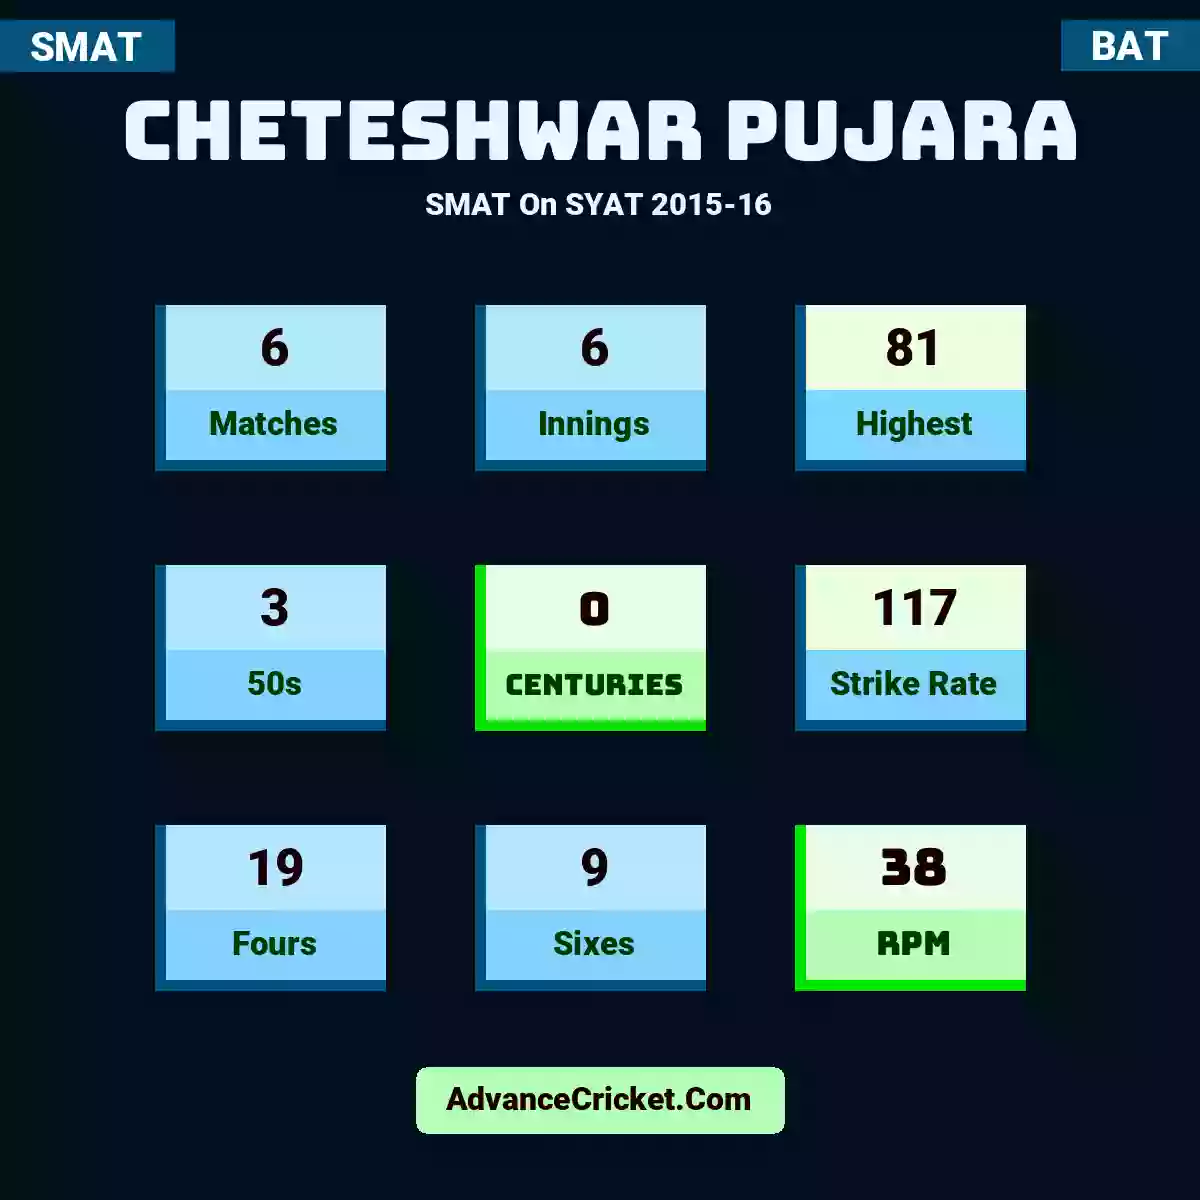 Cheteshwar Pujara SMAT  On SYAT 2015-16, Cheteshwar Pujara played 6 matches, scored 81 runs as highest, 3 half-centuries, and 0 centuries, with a strike rate of 117. C.Pujara hit 19 fours and 9 sixes, with an RPM of 38.